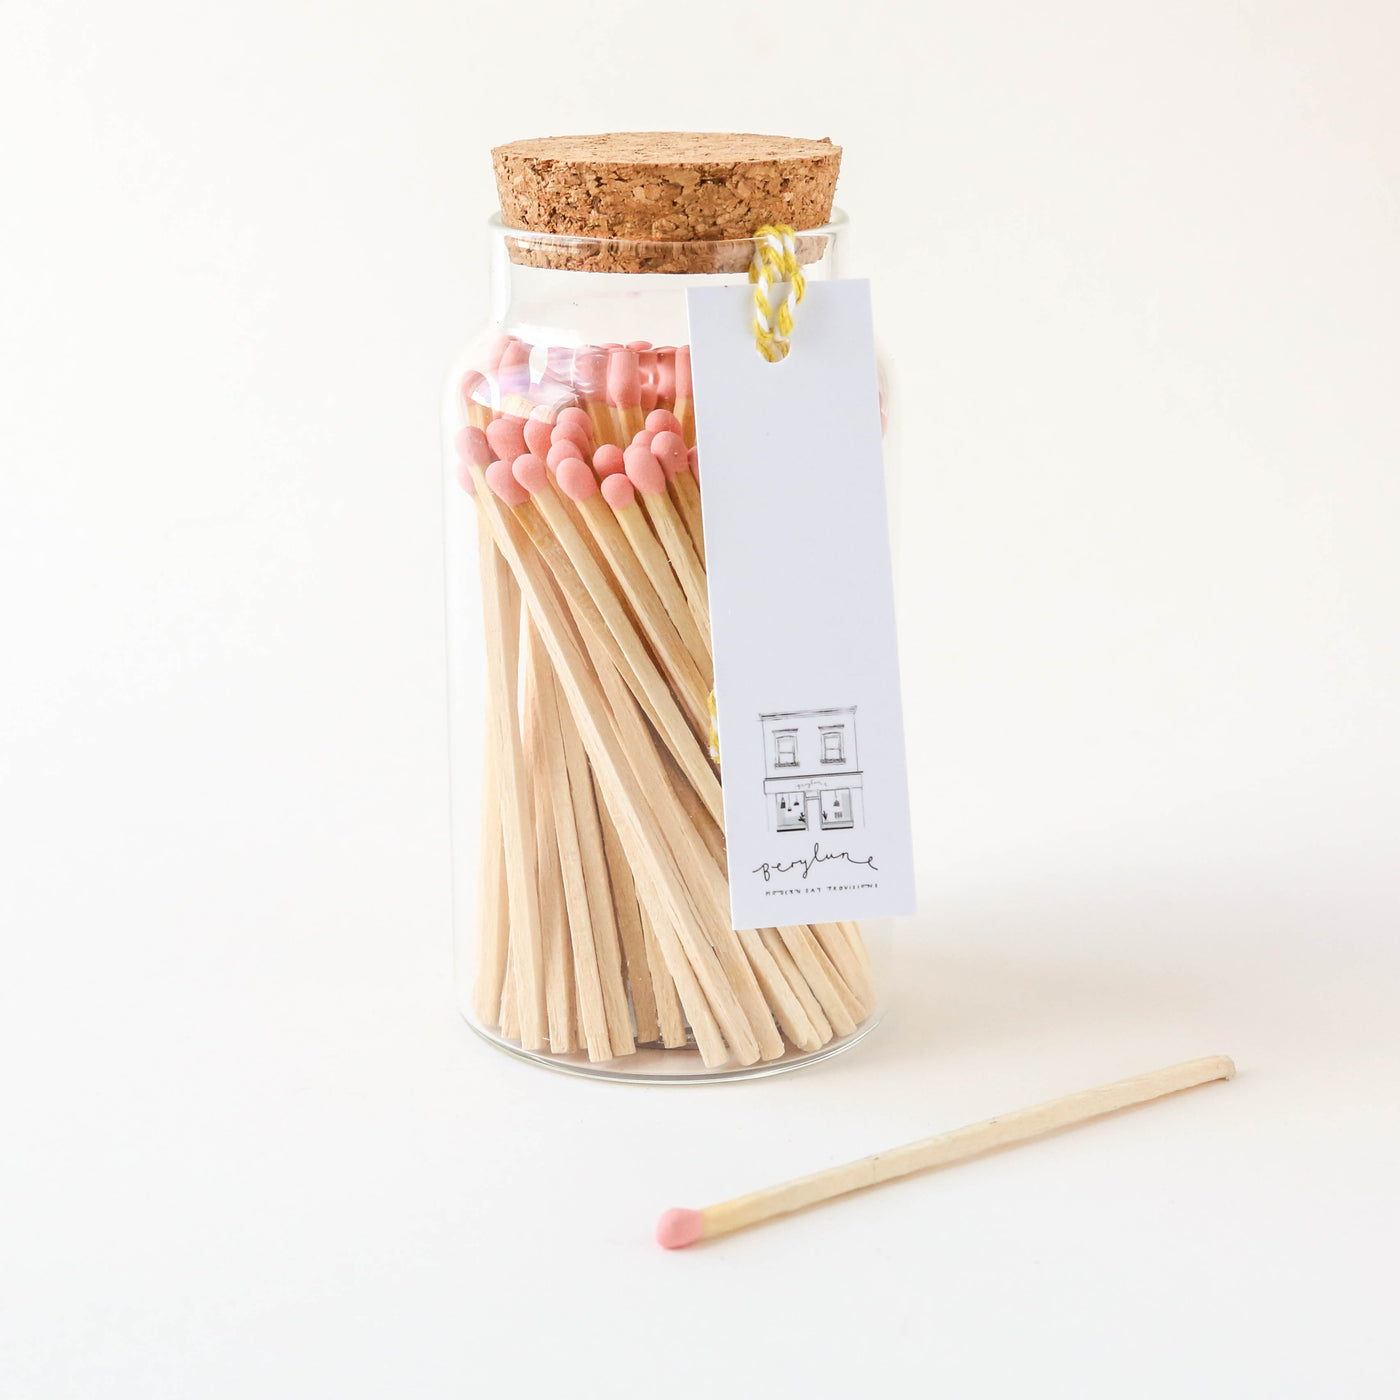 Jar of Matches With a Cork Lid